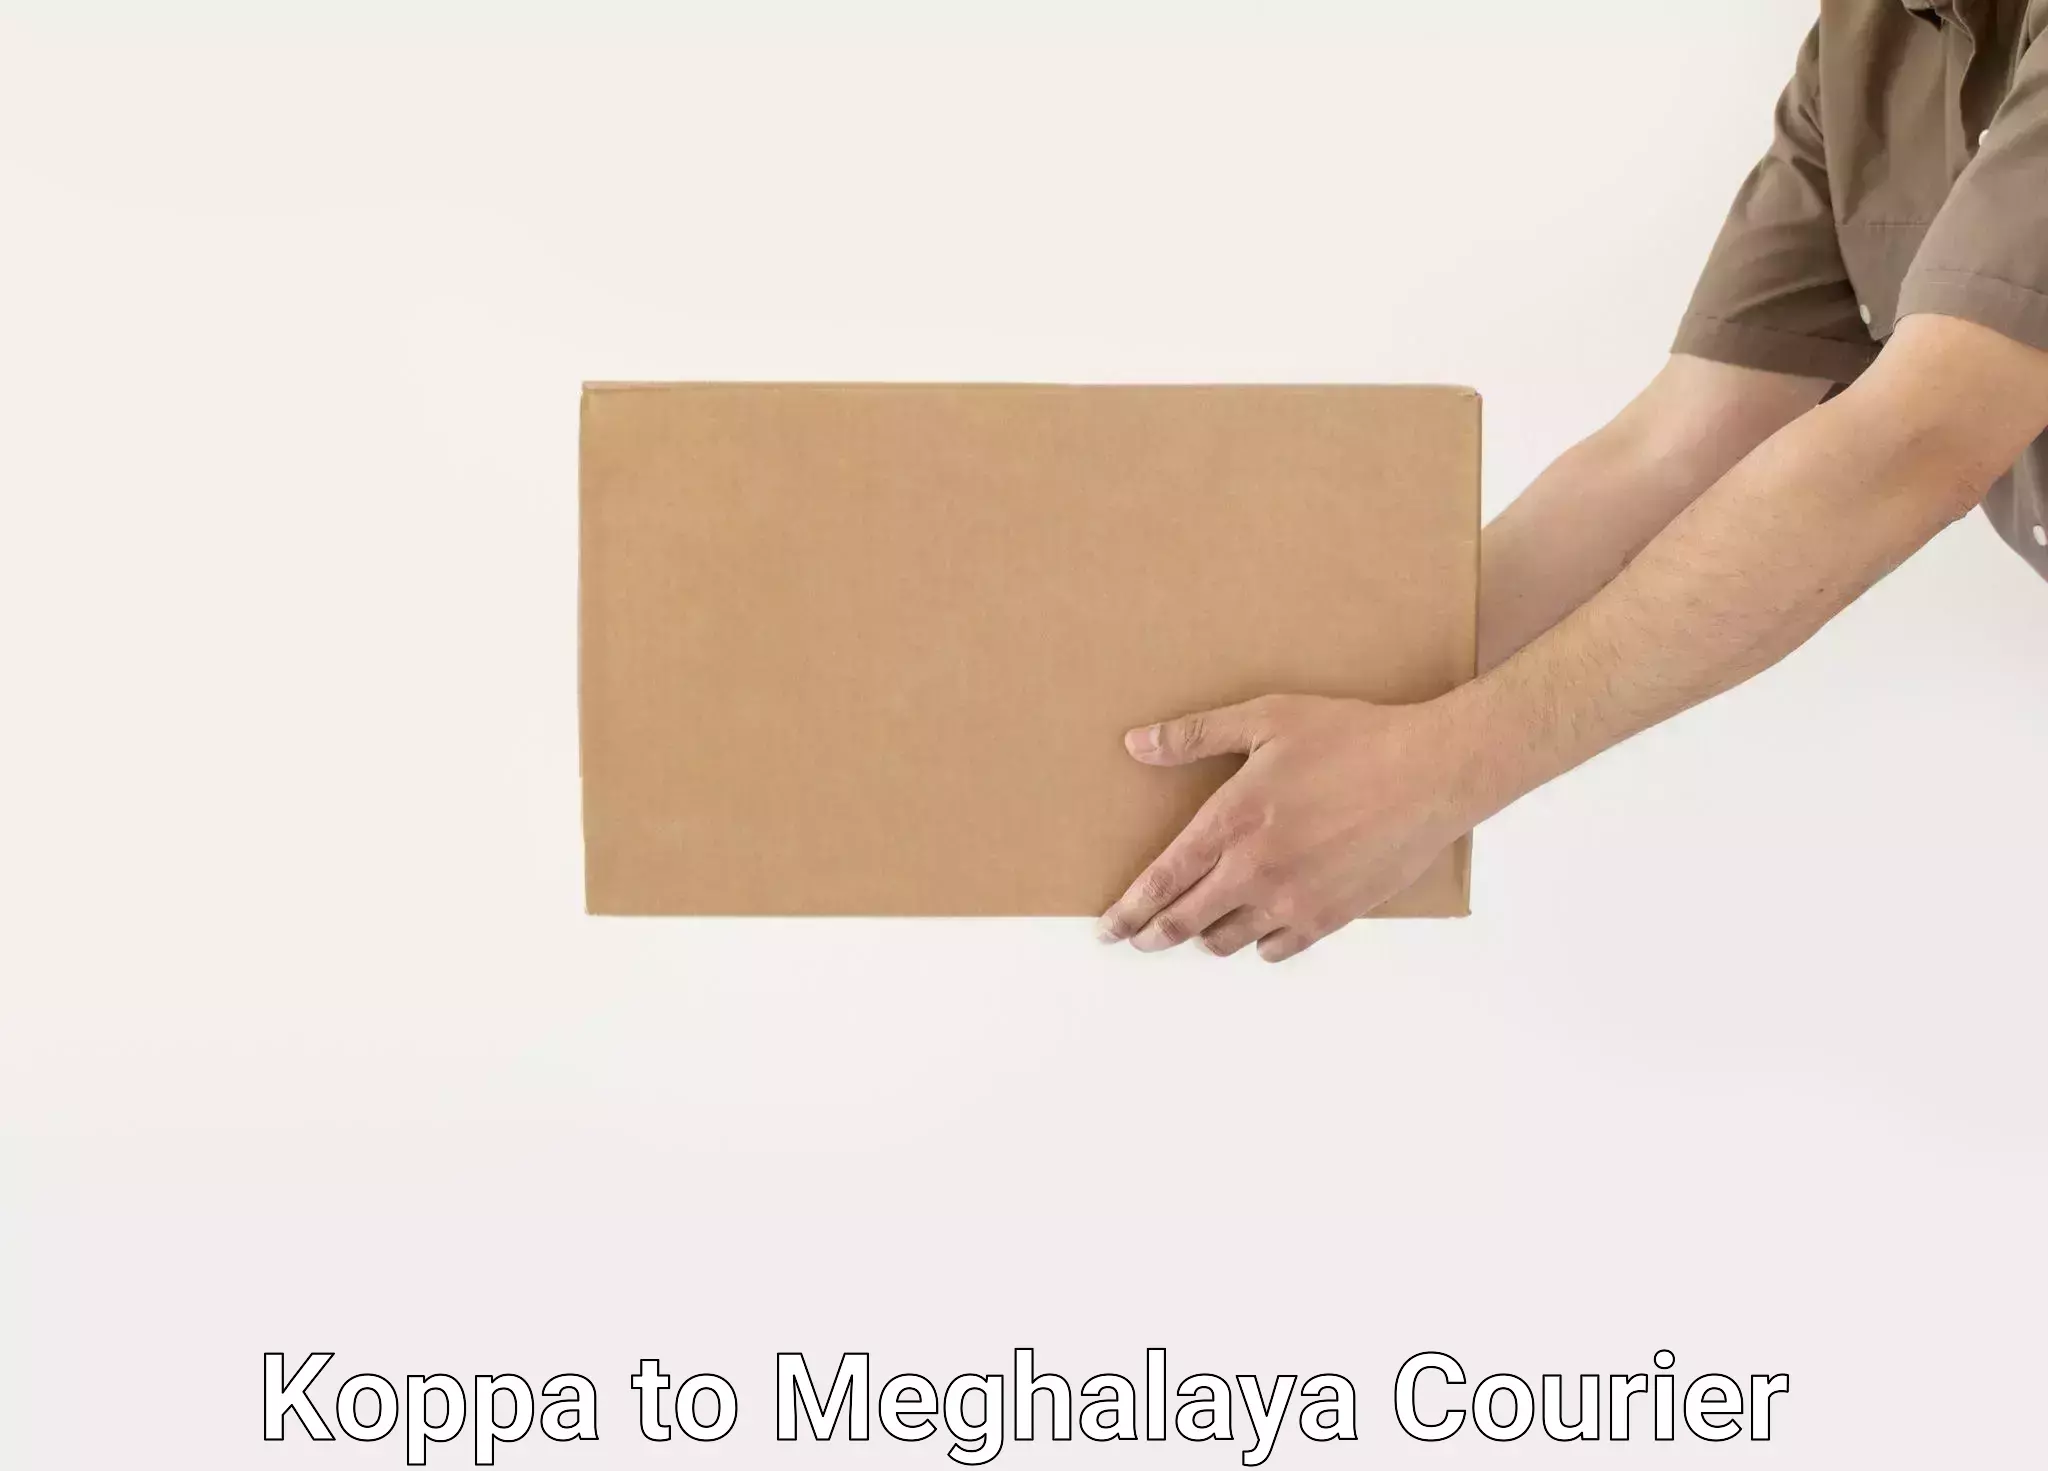 Efficient relocation services Koppa to Meghalaya